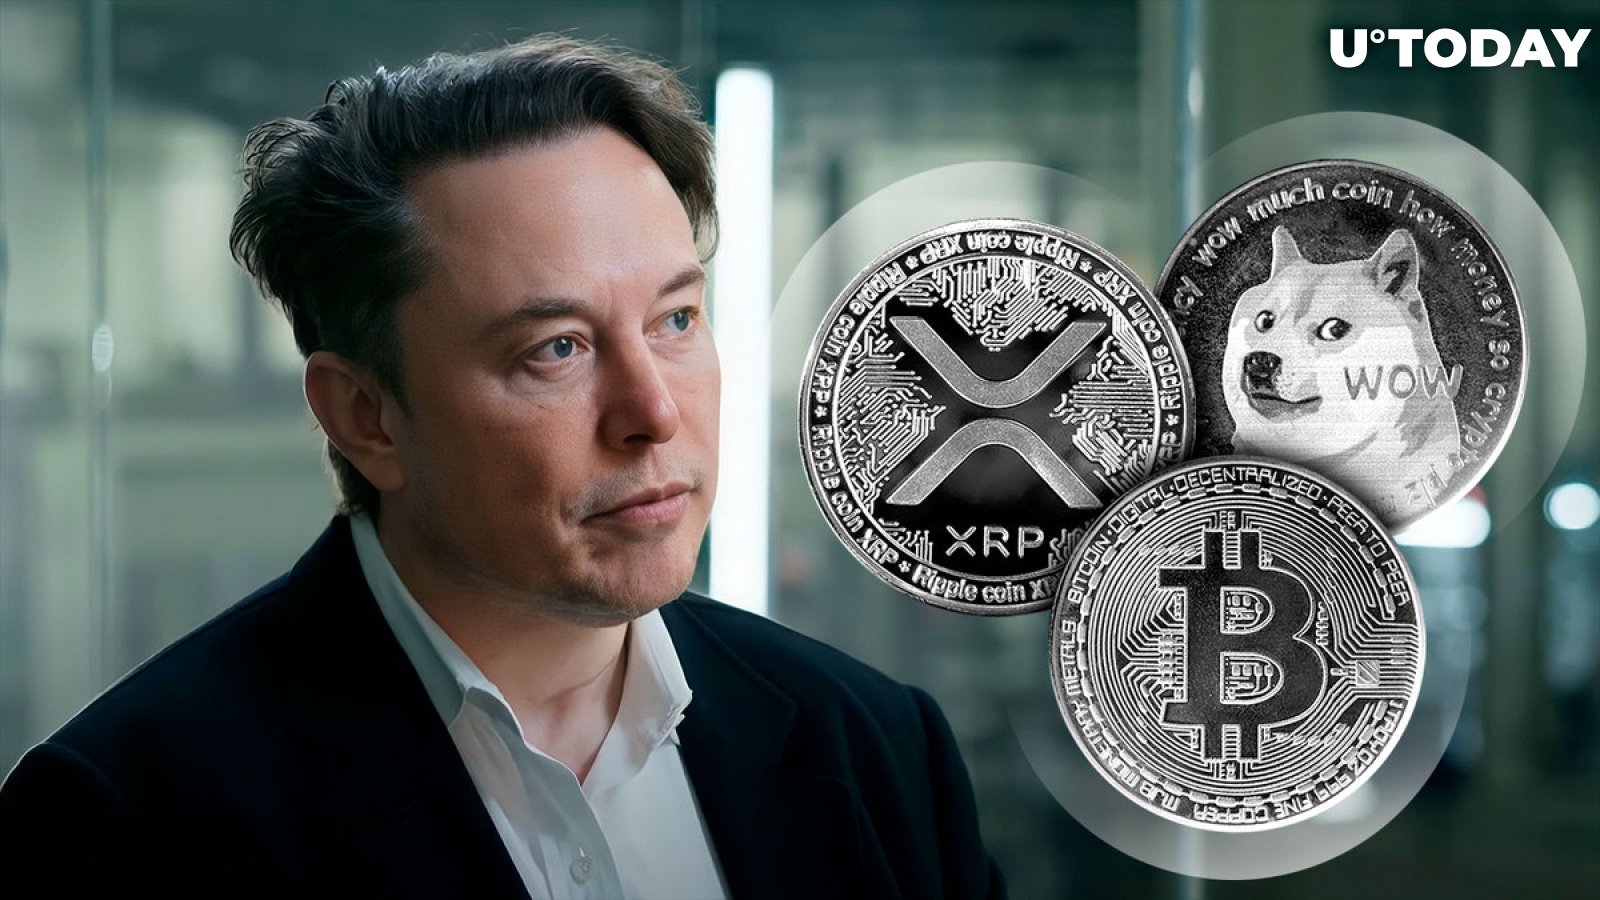 BTC, XRP and DOGE communities are excited about Elon Musk's X message